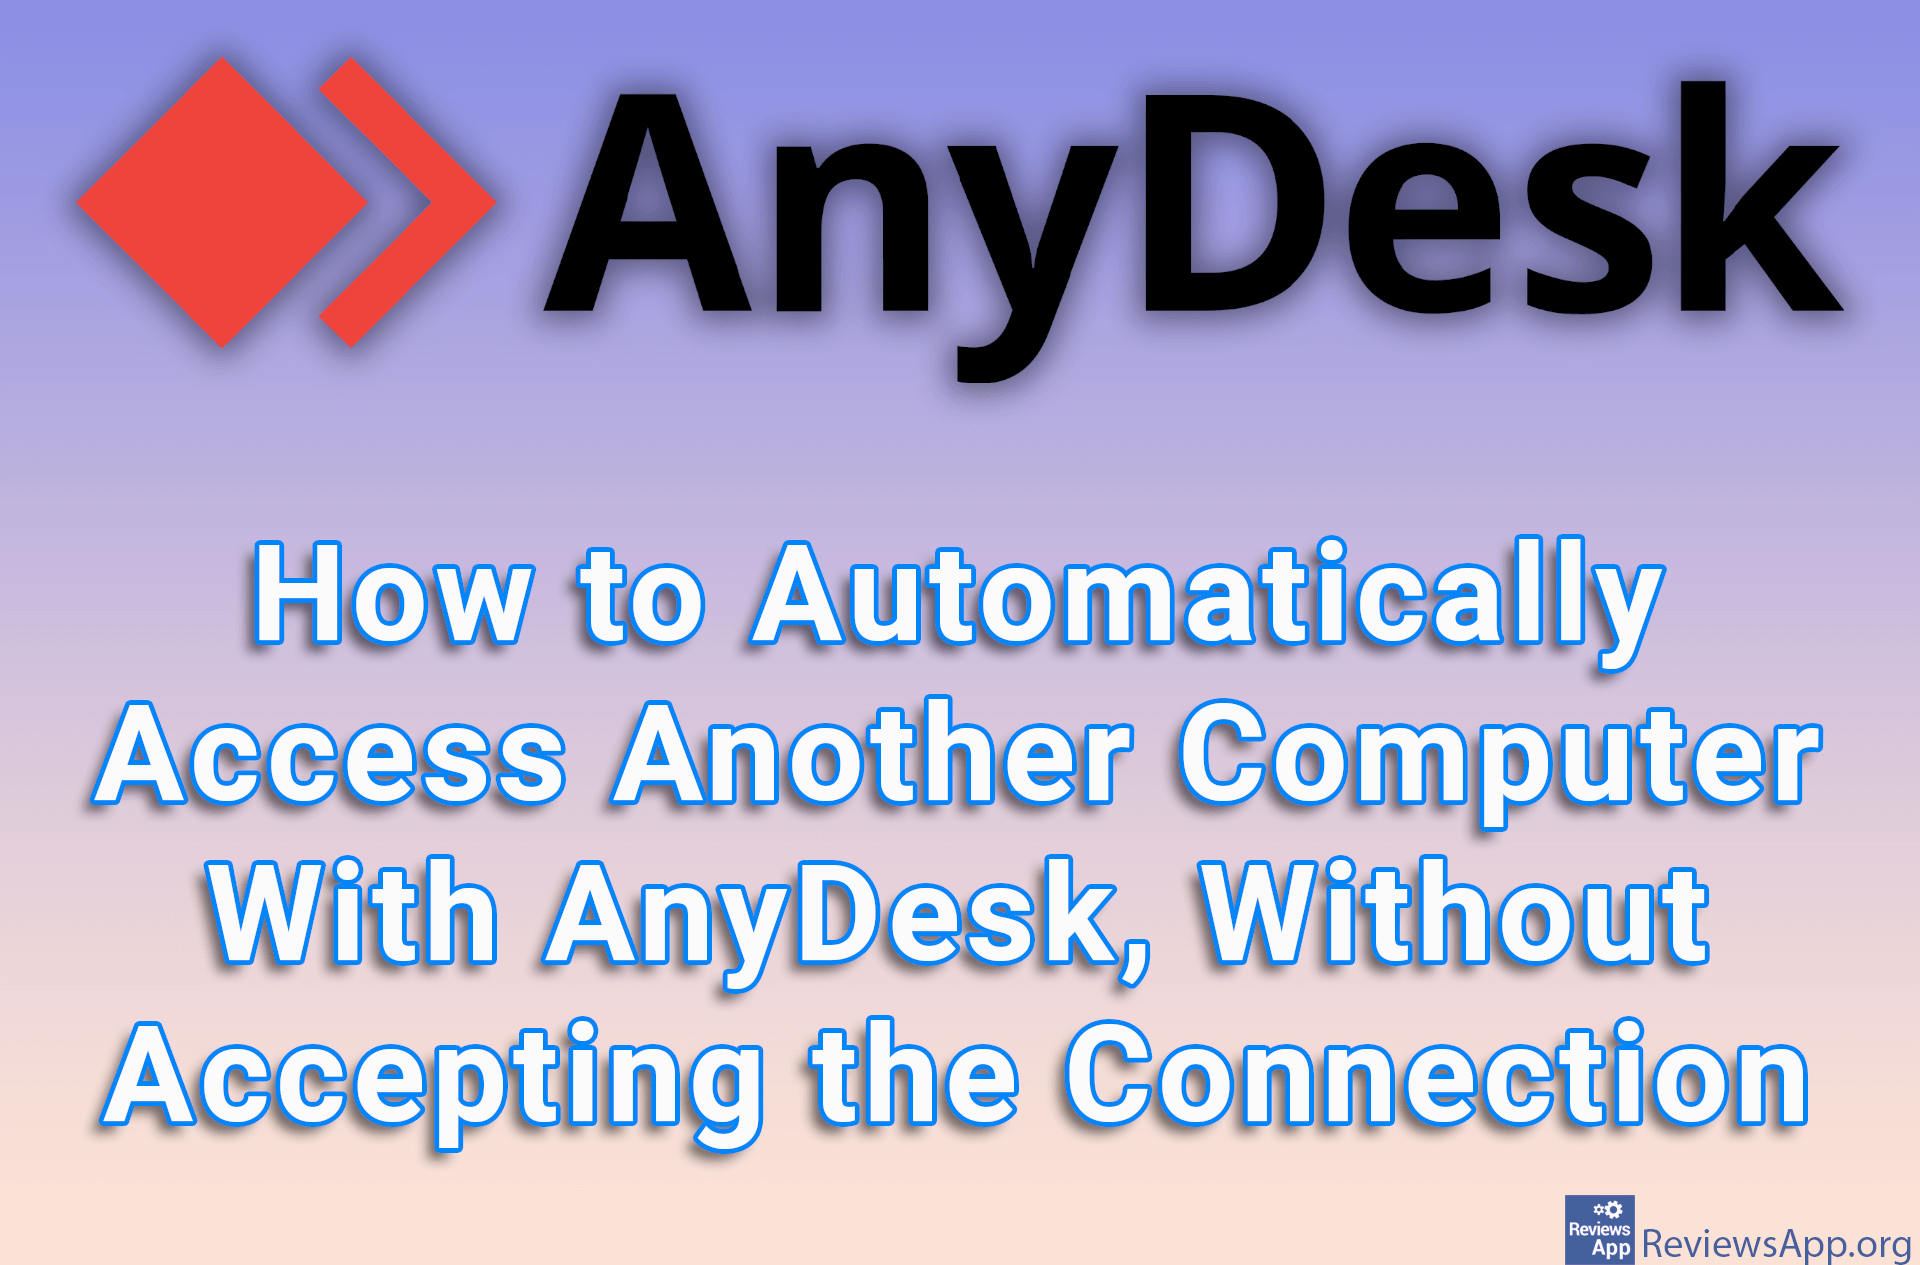 How to Automatically Access Another Computer With AnyDesk, Without Accepting the Connection